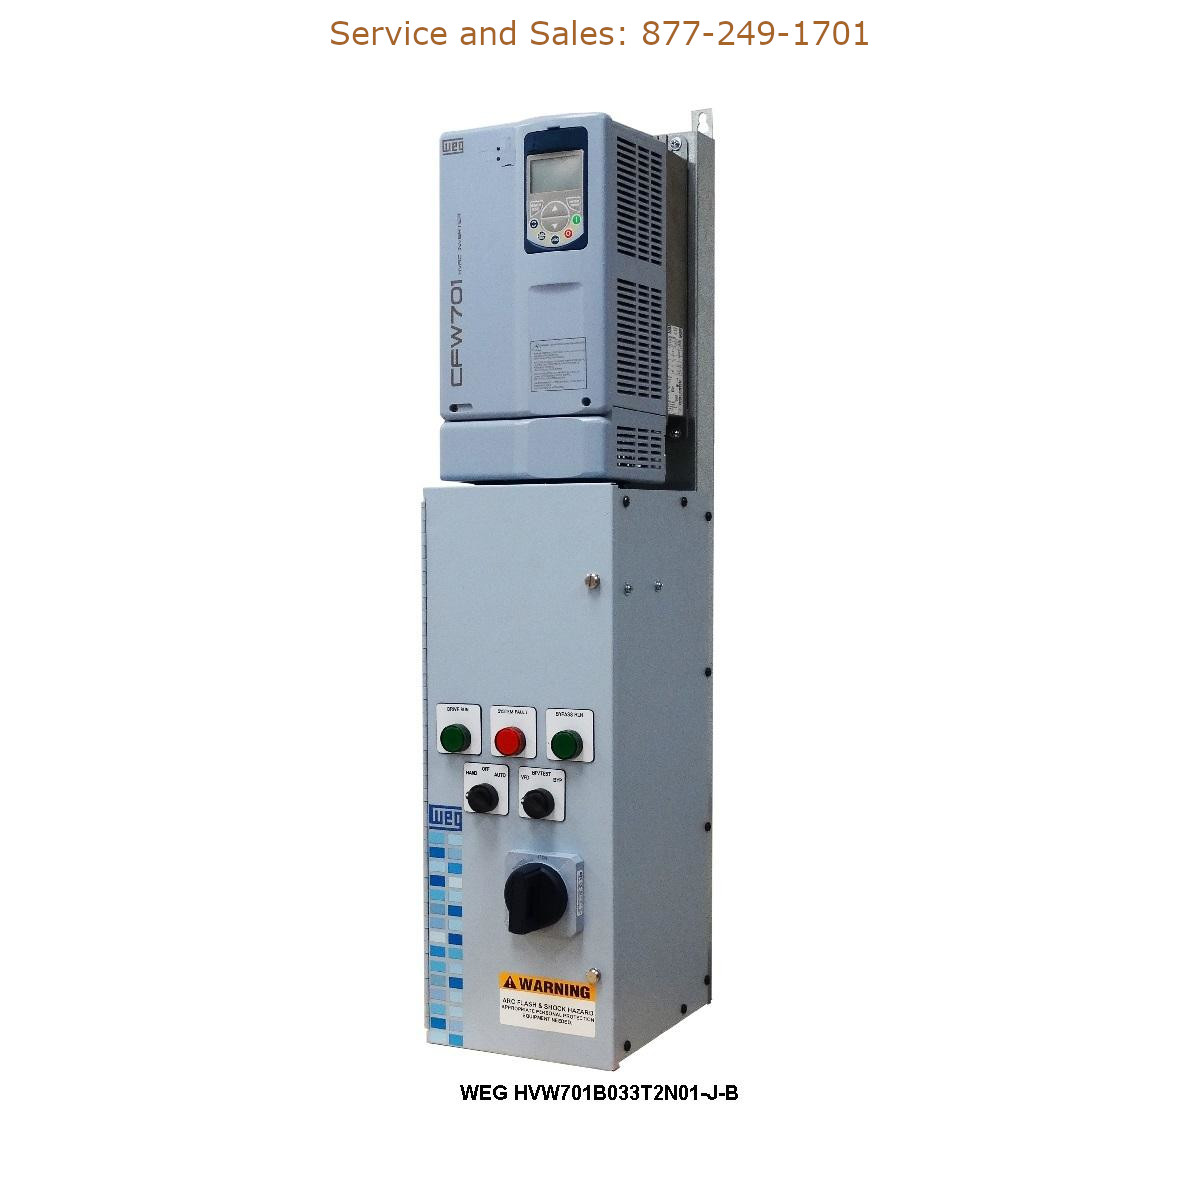 WEG HVW701B033T2N01-J-B WEG Model Number HVW701B033T2N01-J-B WEG Drives, Variable Speed Drives Repair Service, Troubleshooting, Replacement Parts https://gesrepair.com/wp-content/uploads/2022/WEG/WEG_HVW701B033T2N01-J-B_Drives_Variable_Speed_Drives.jpg